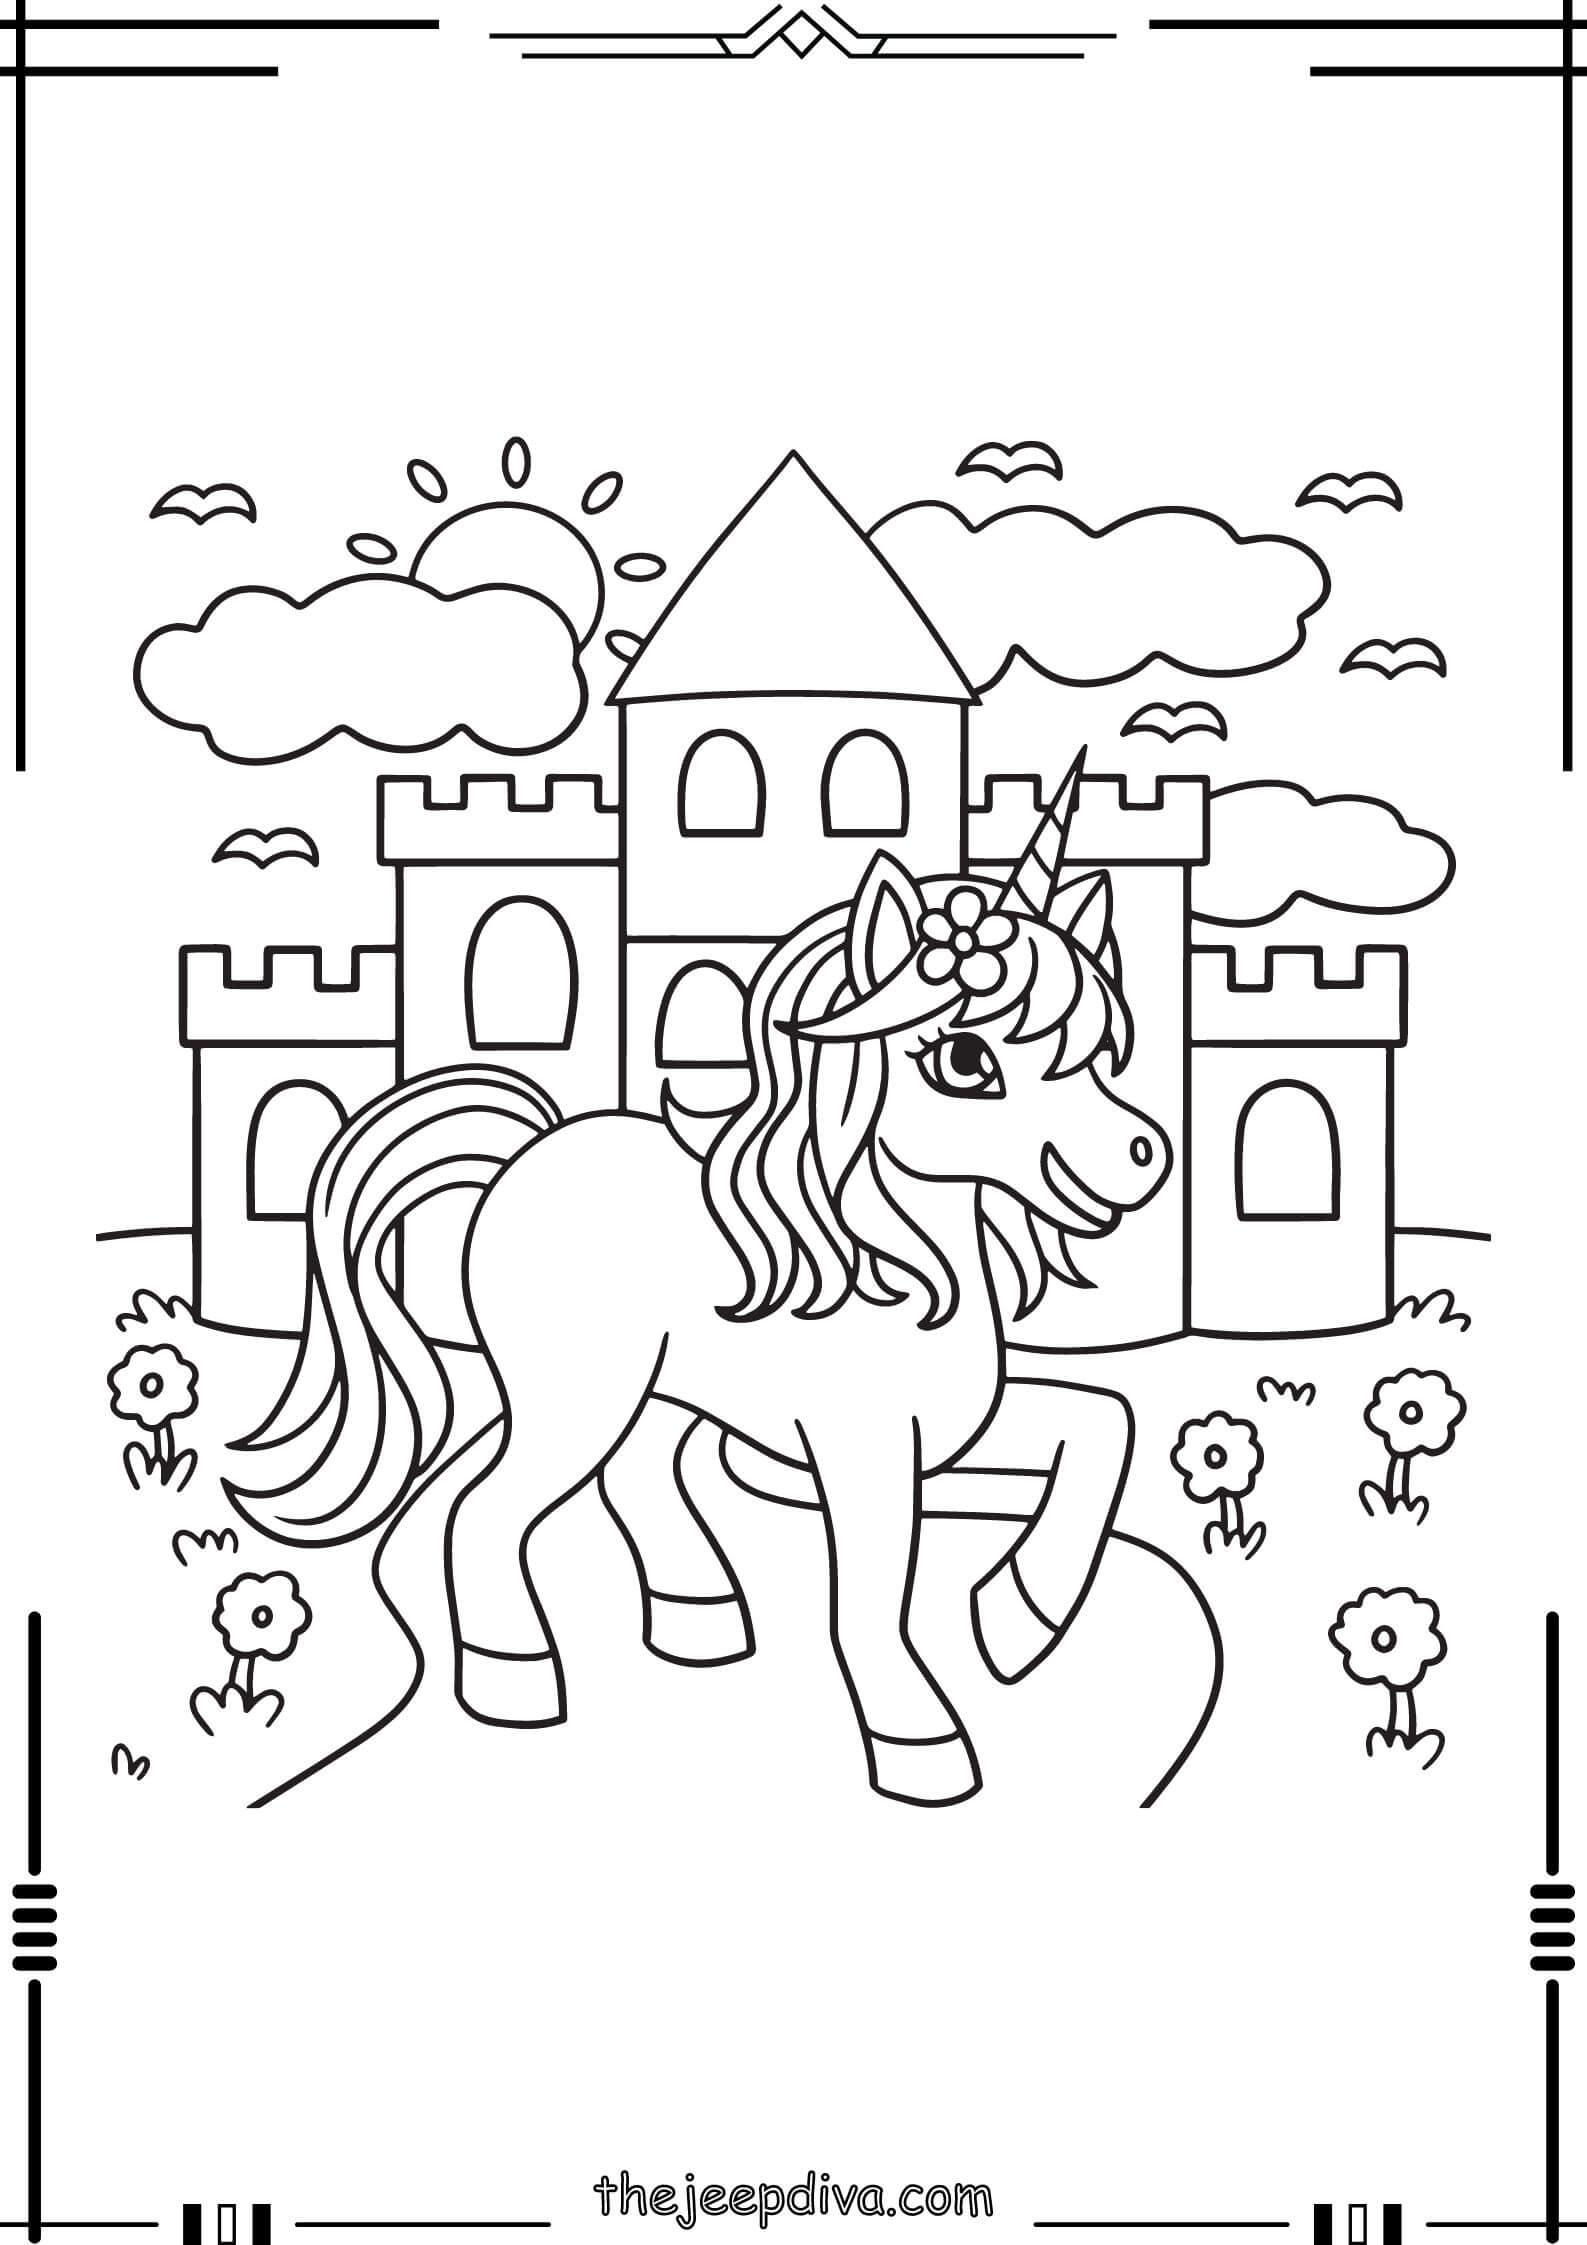 unicorn-coloring-page-easy-20